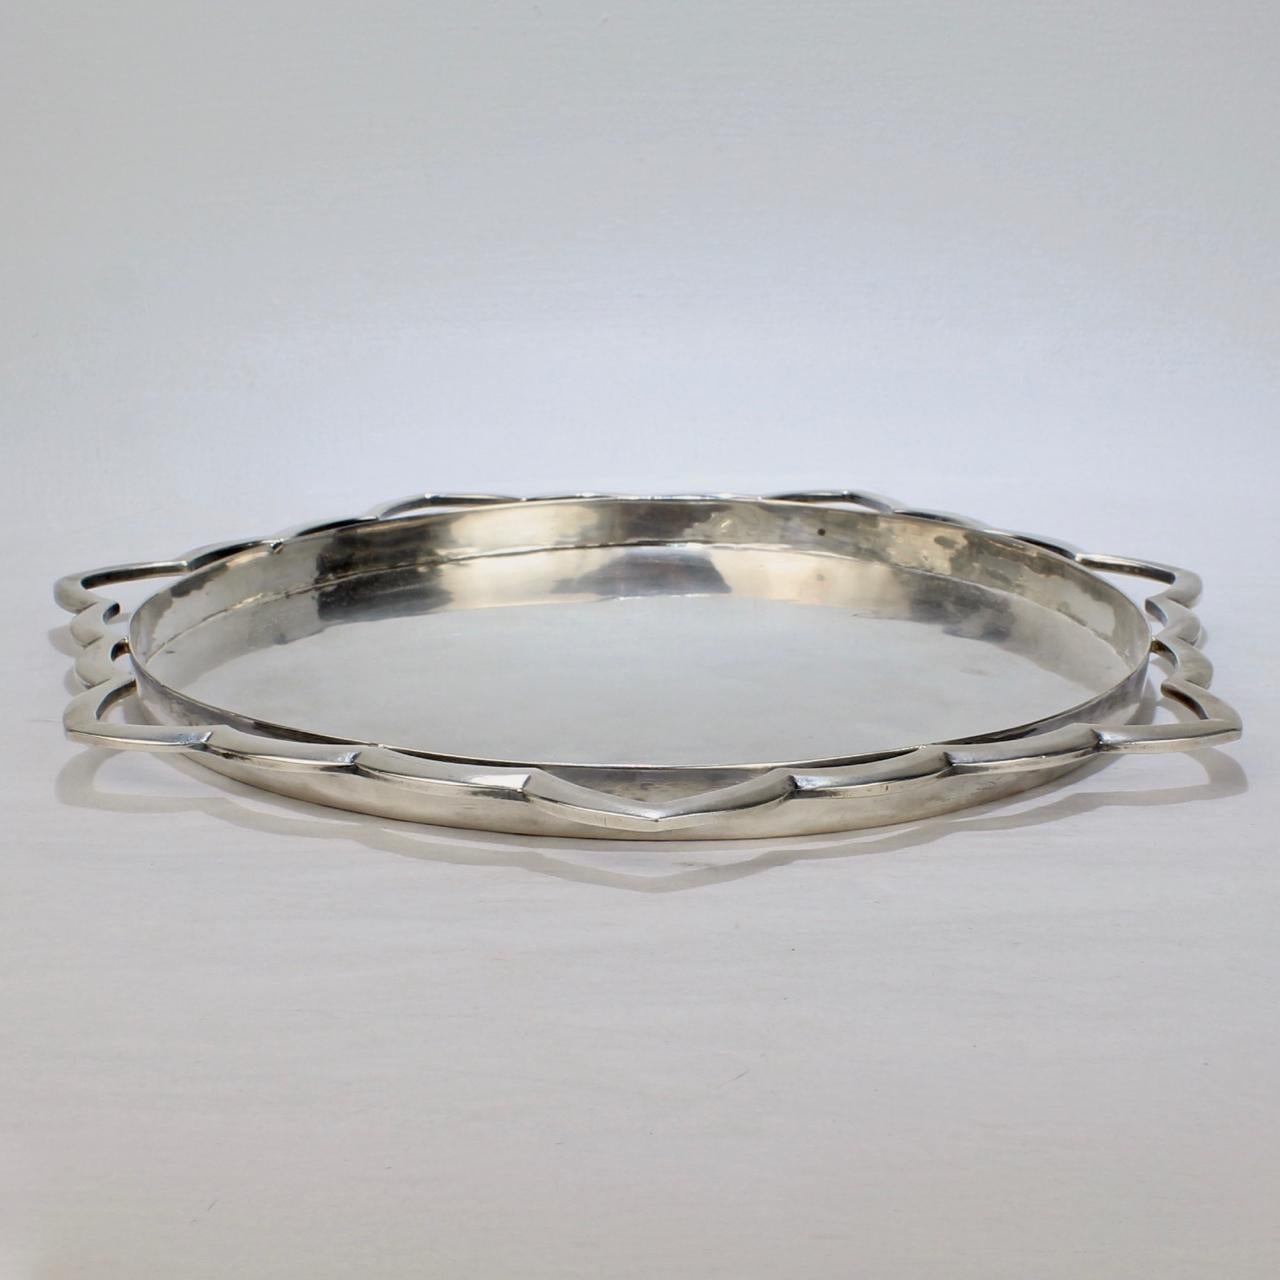 Women's or Men's American Modernist Handwrought Sterling Silver Tray by Henry Petzal, 1970s